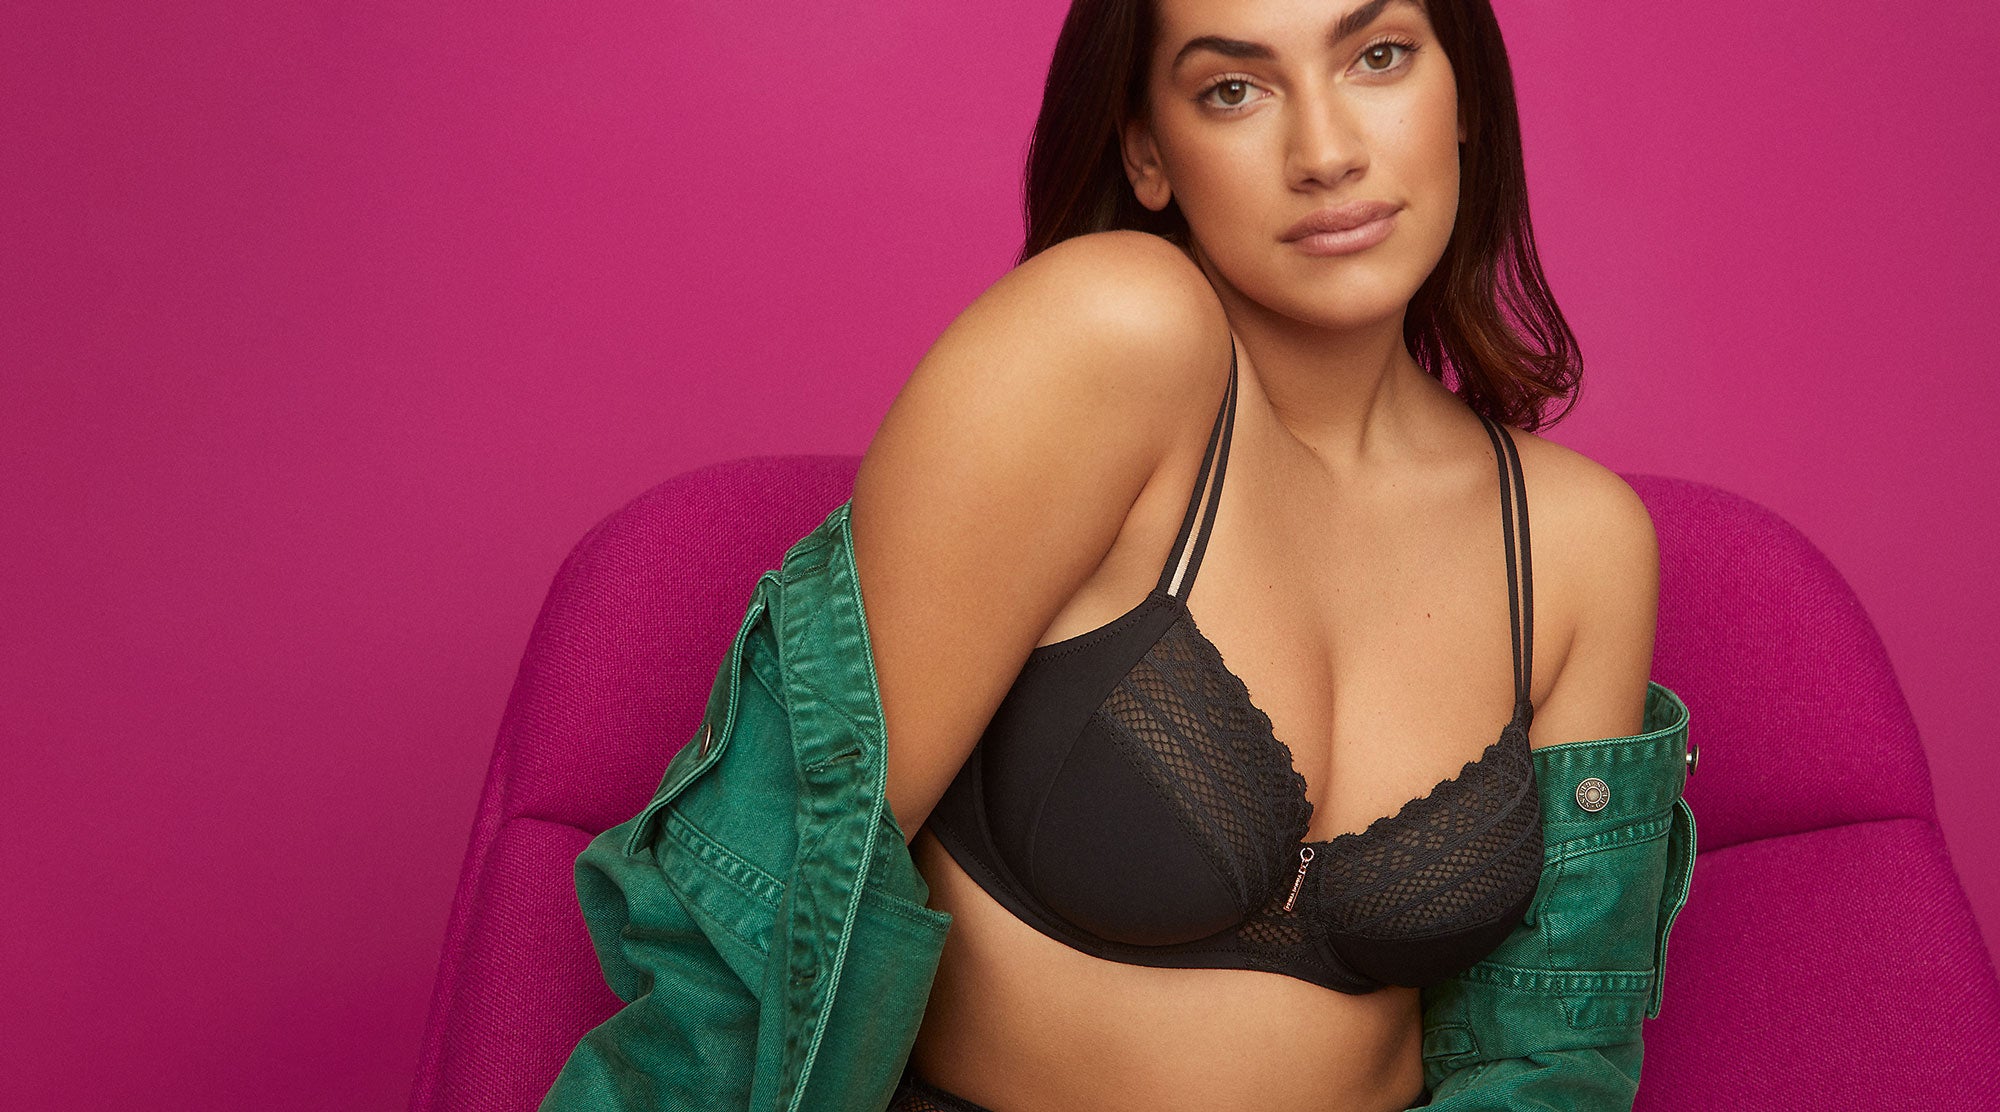 New Bra Style, Shop The Largest Collection